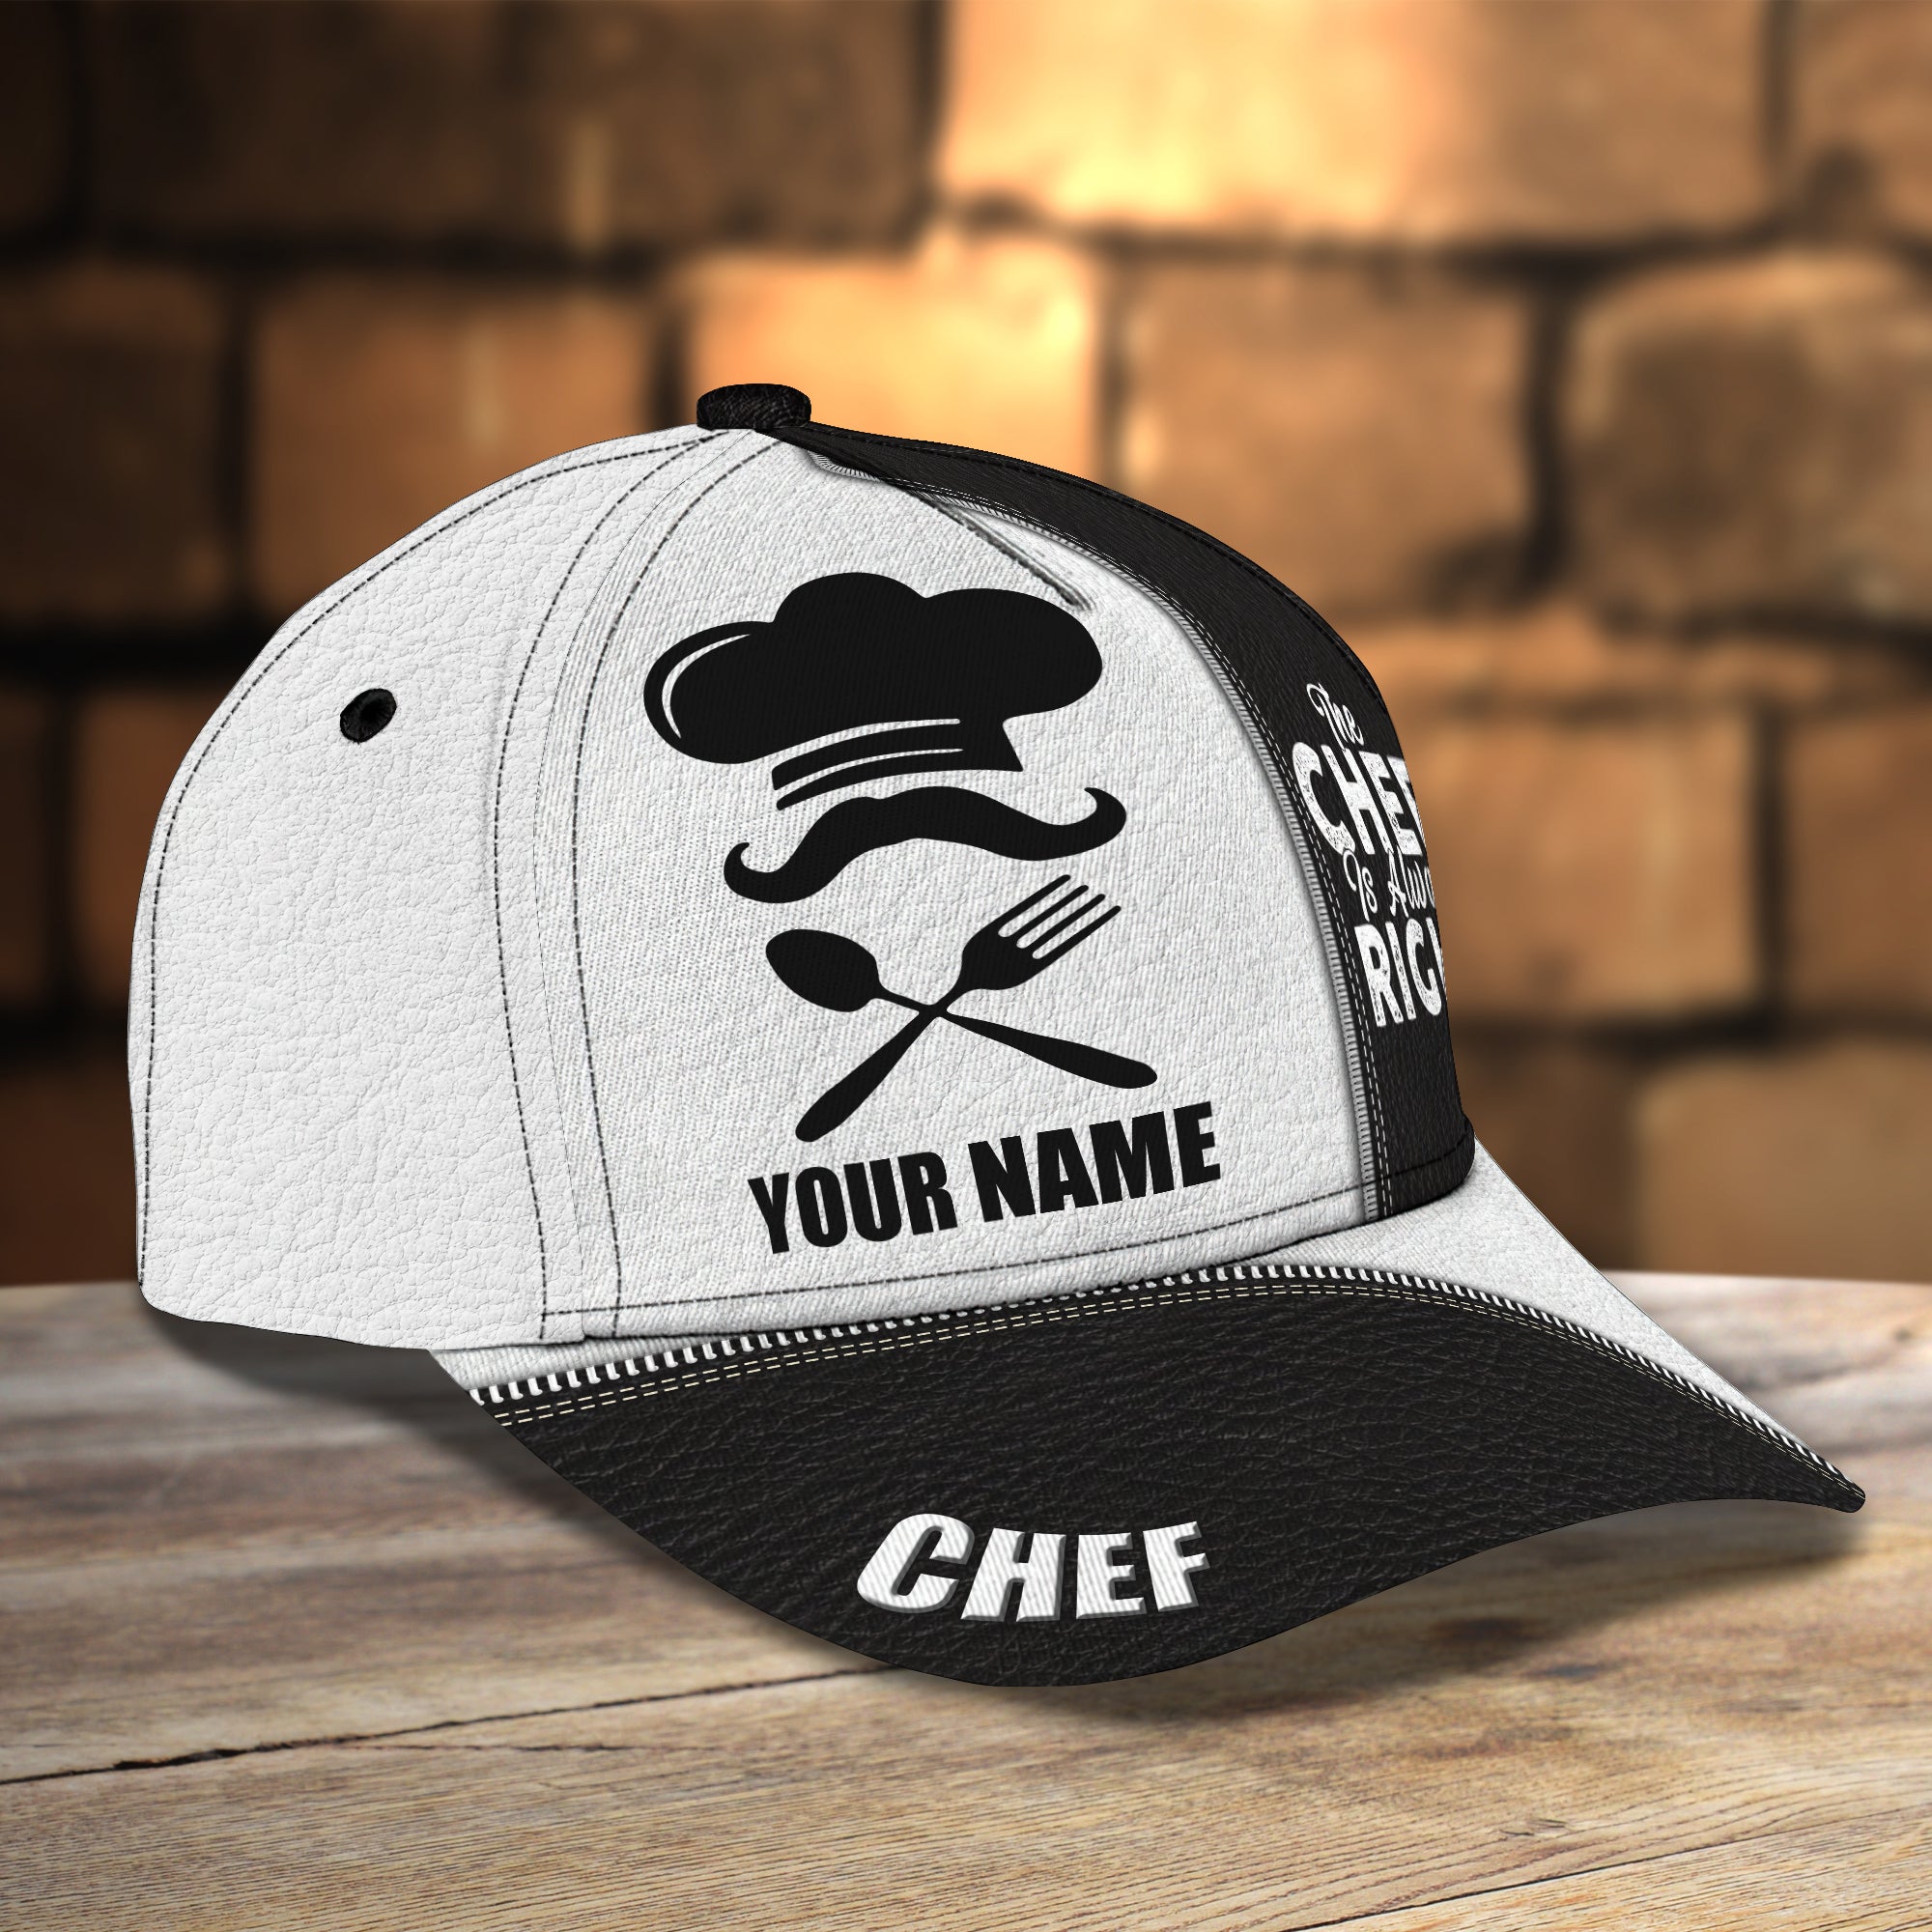 Chef Is Always Right - Personalized Name Cap - Nmd 23